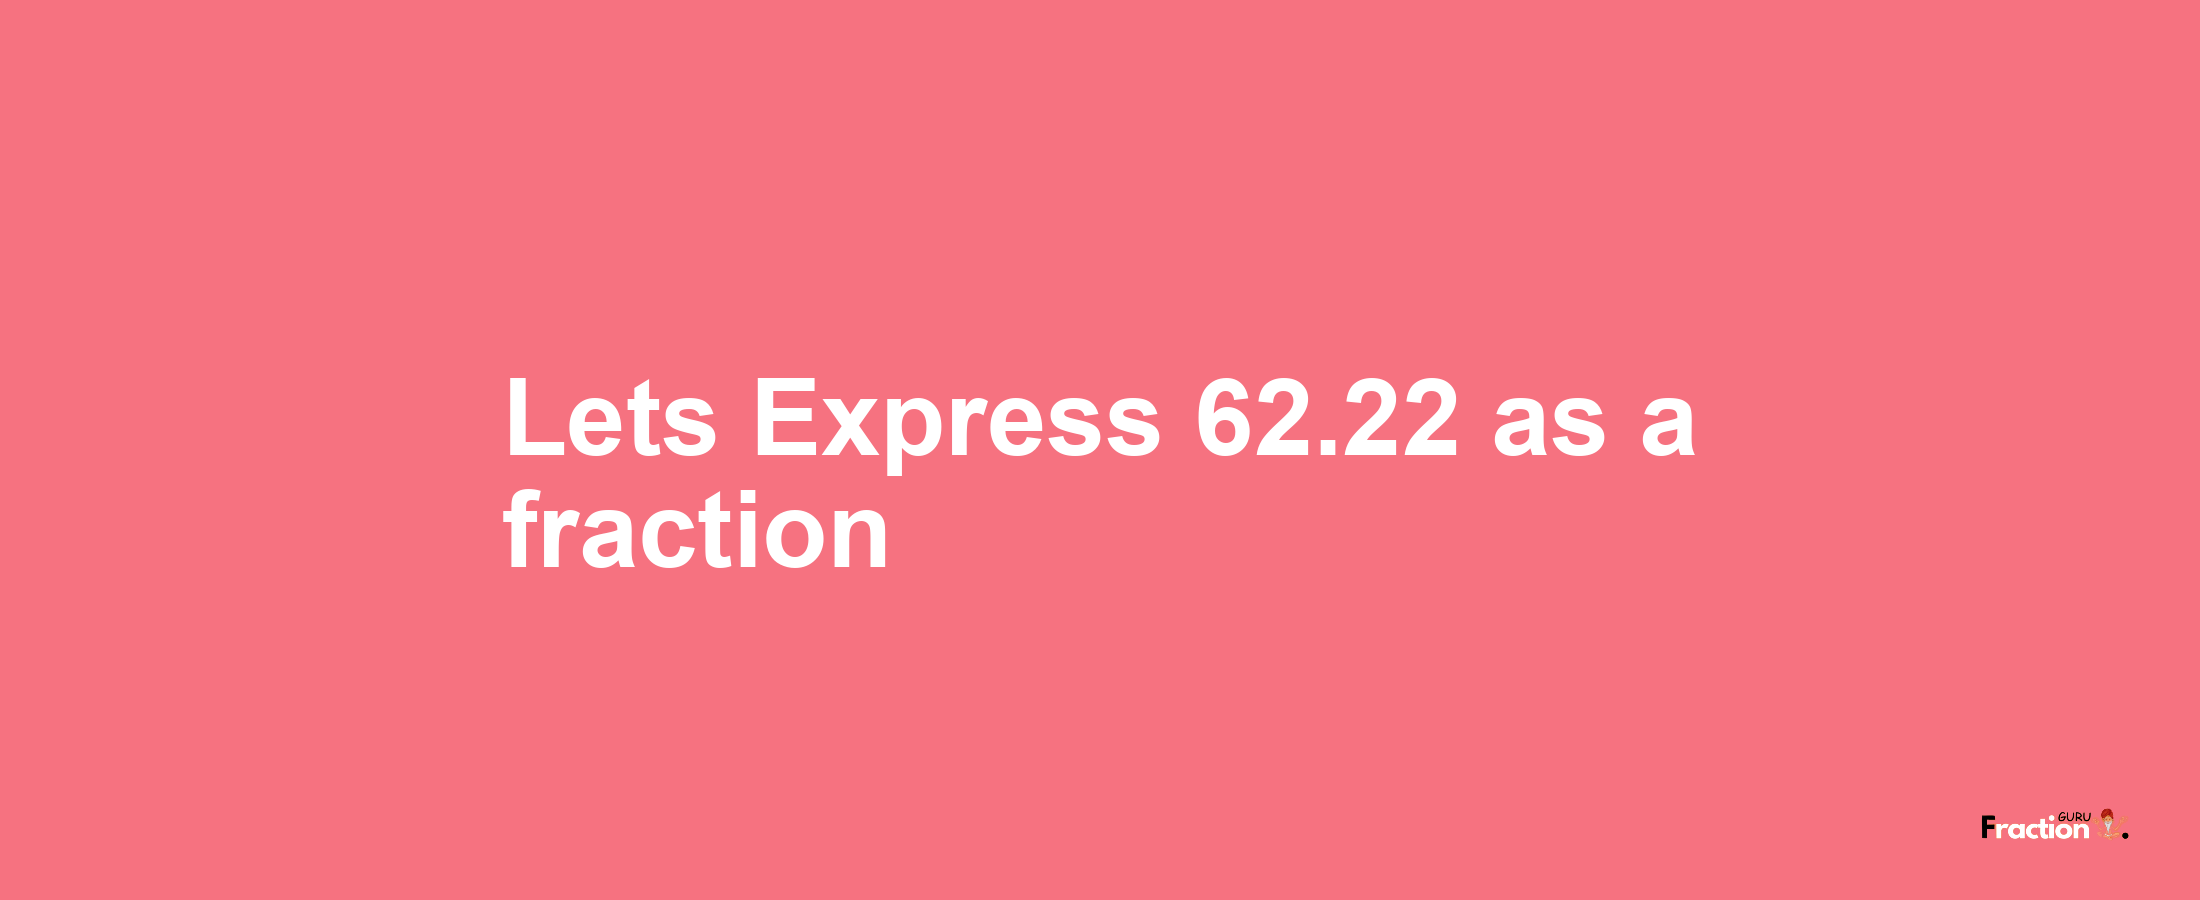 Lets Express 62.22 as afraction